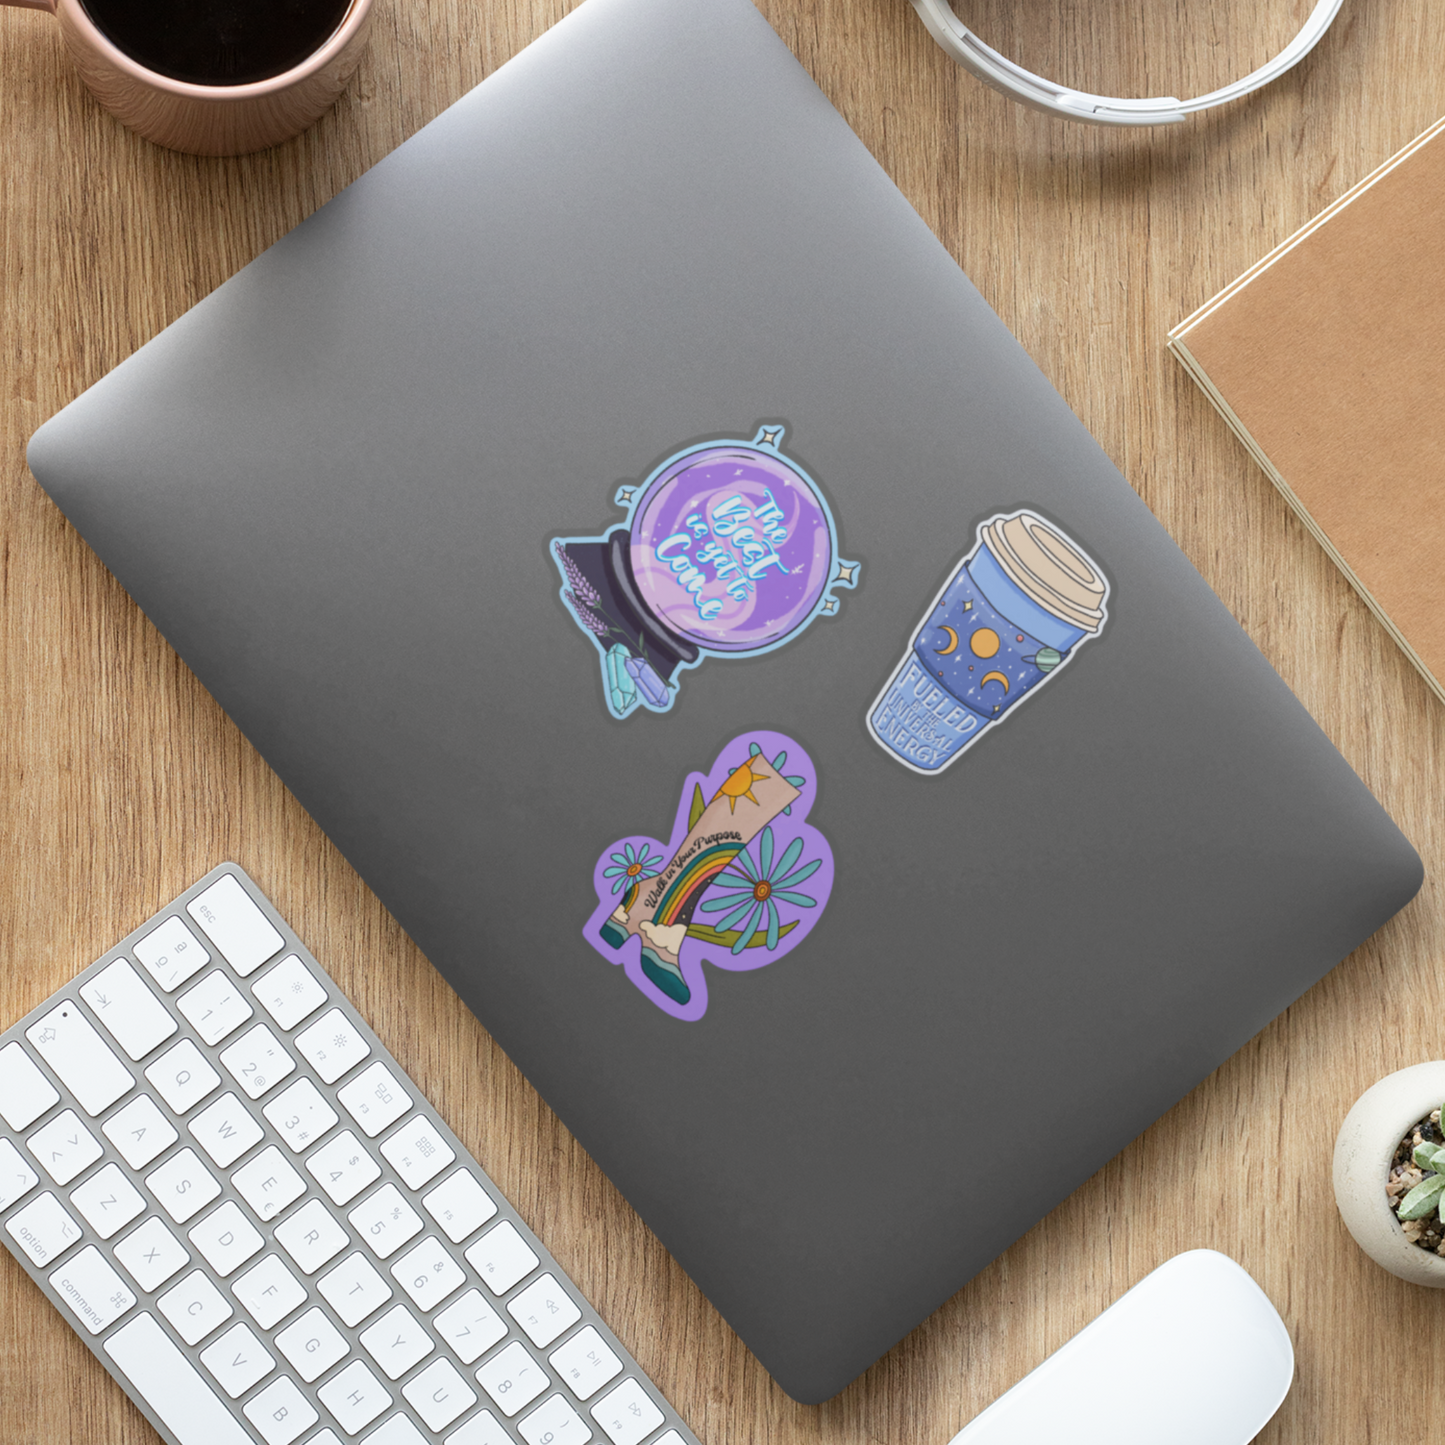 The Cosmic Friend Sticker Club - 4 New Stickers Delievered To You Every Month